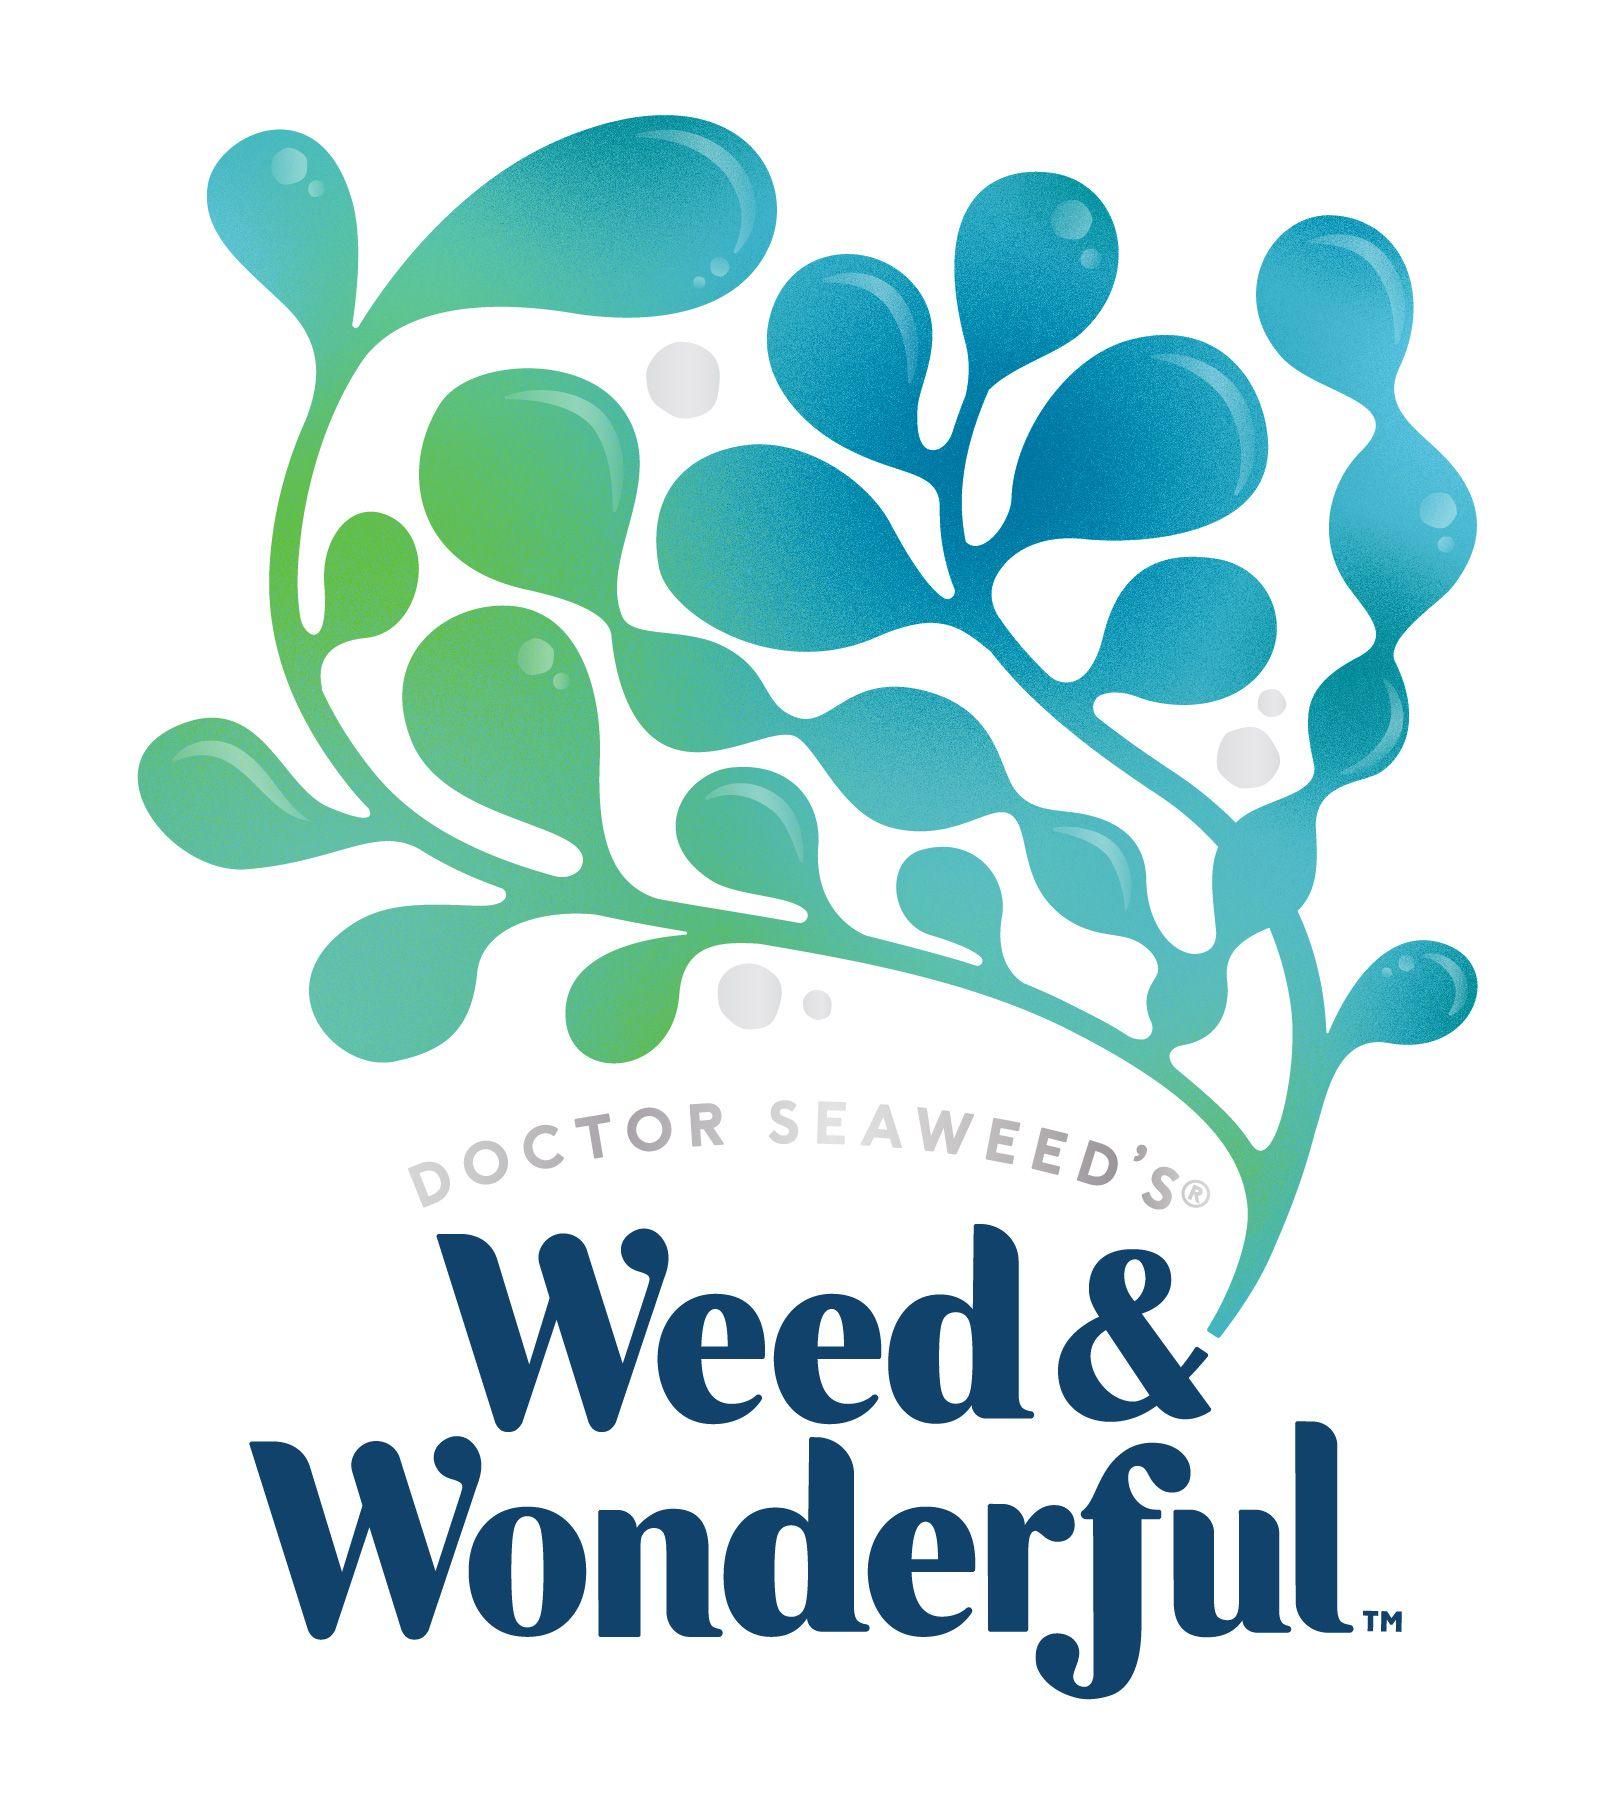 Wonderful Logo - Brand New: New Logo and Packaging for Weed & Wonderful